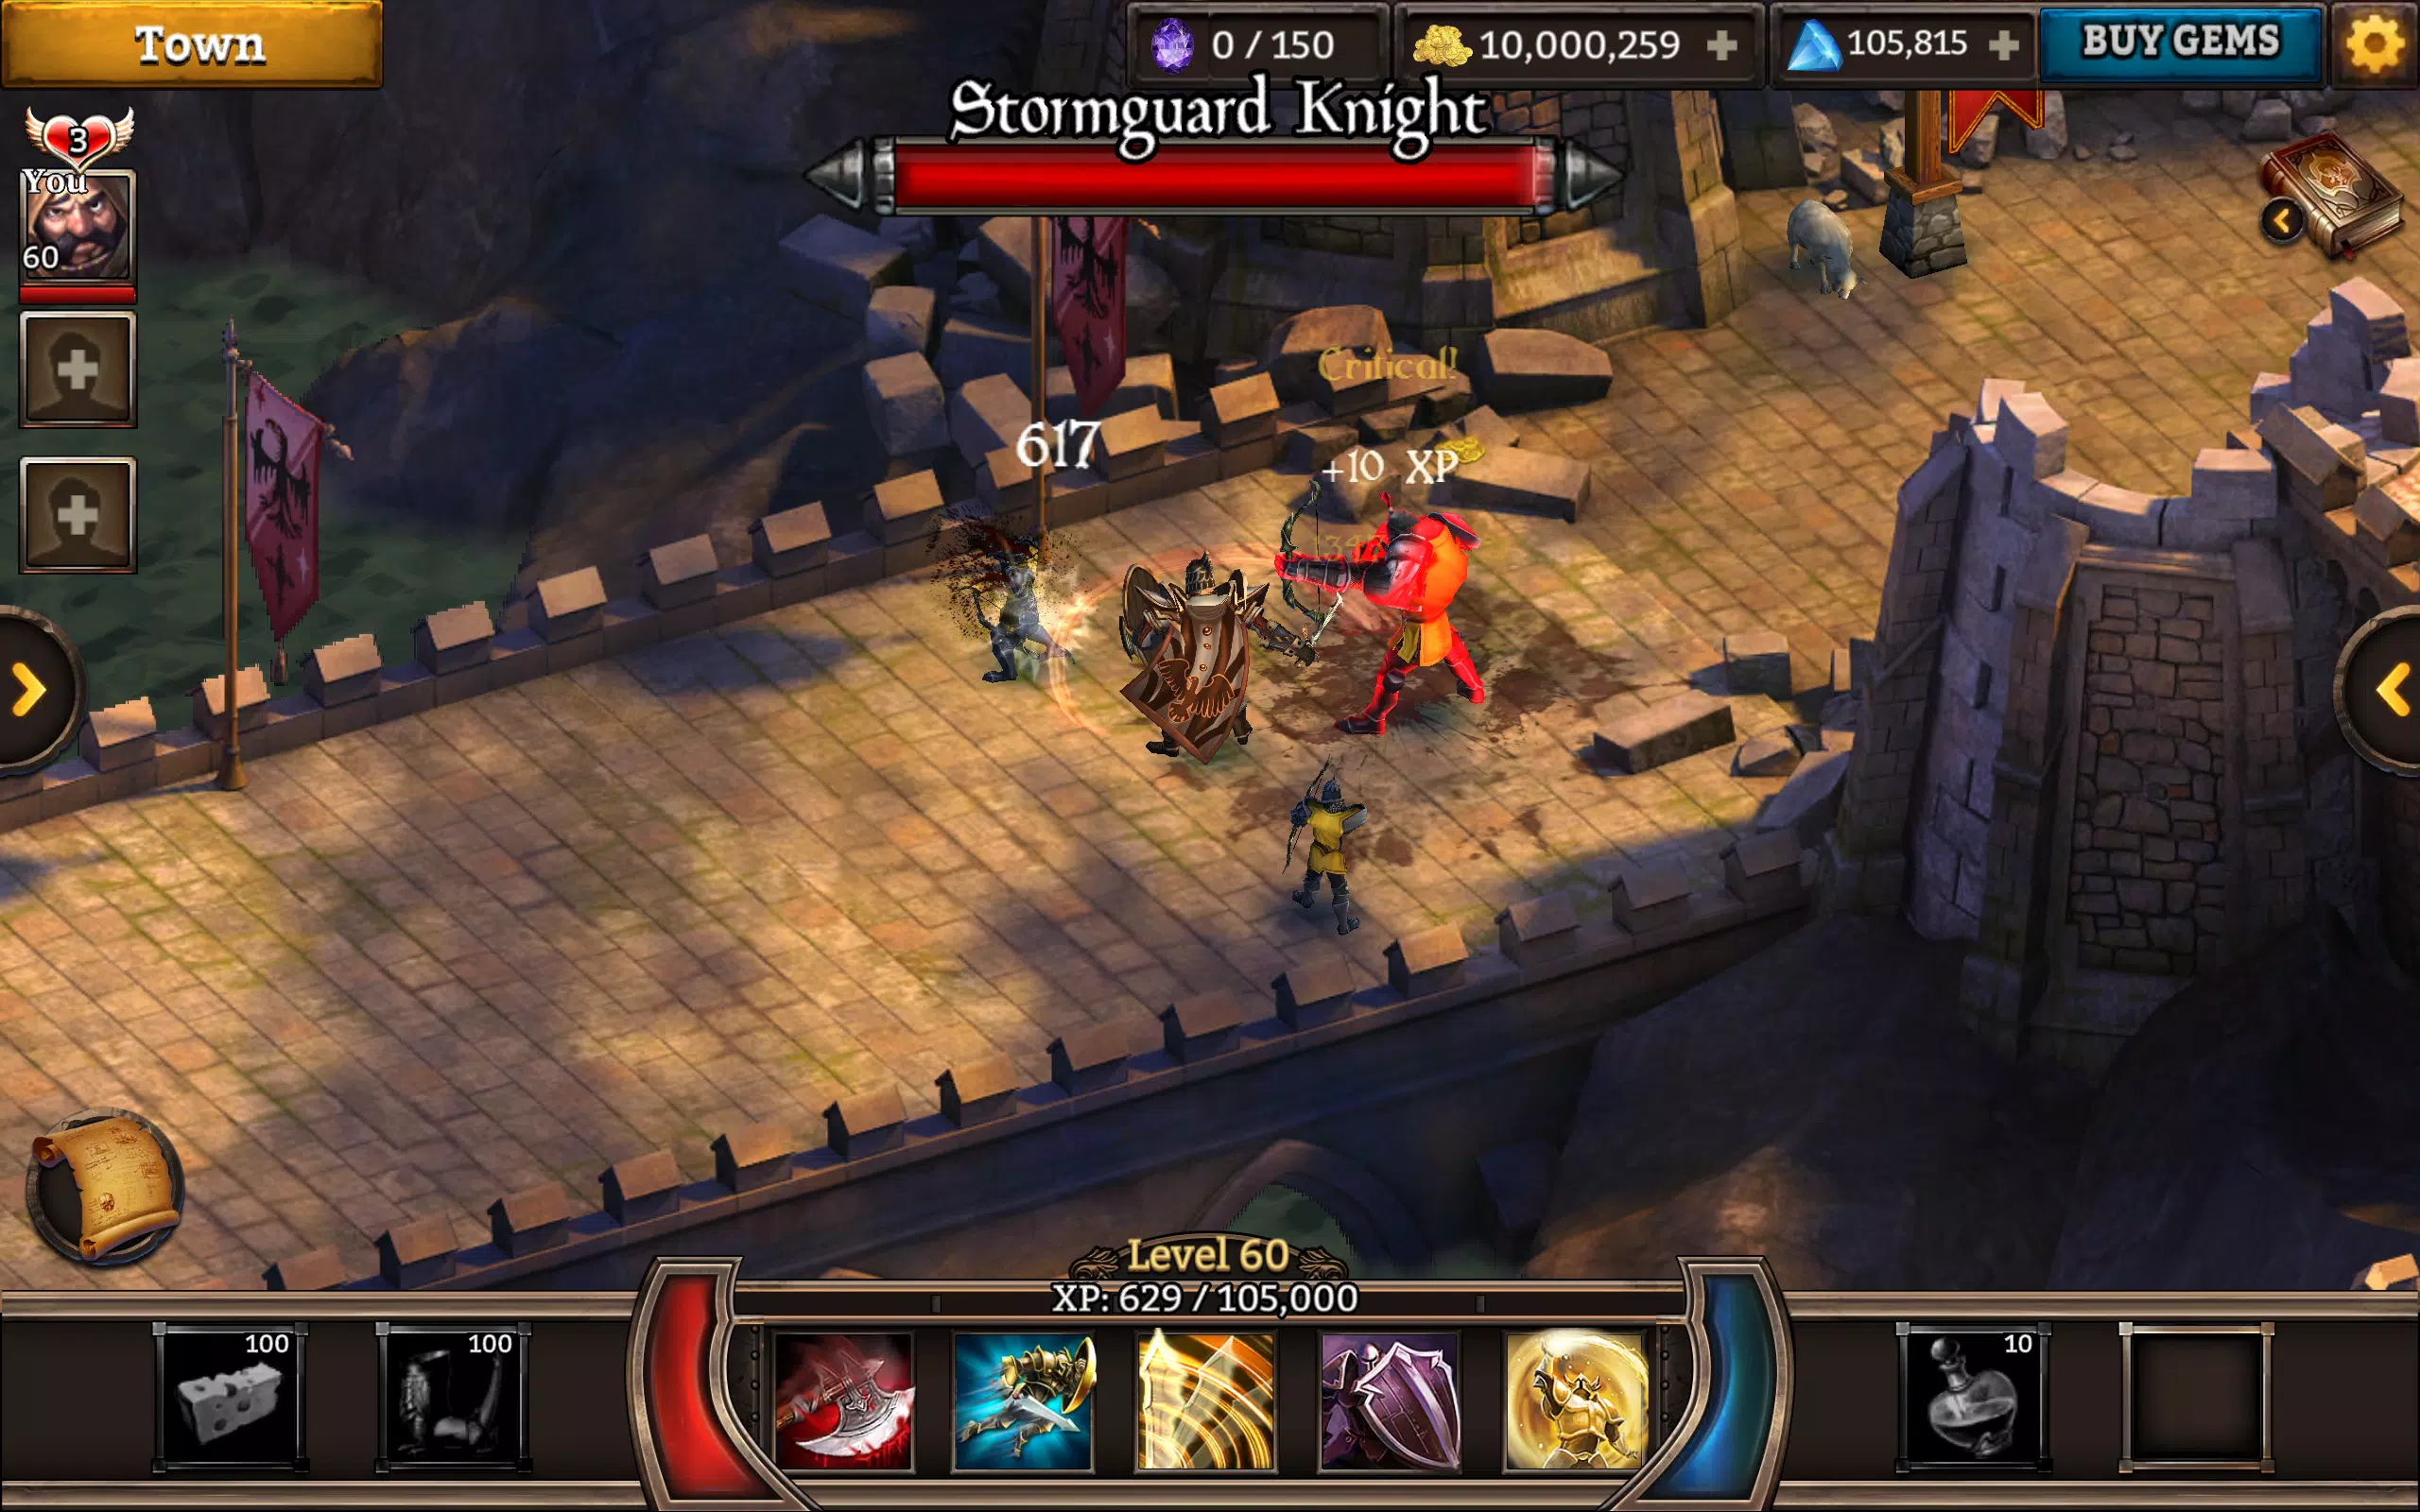 KingsRoad - Free Online Action RPG - No Download - Free-to-Paly